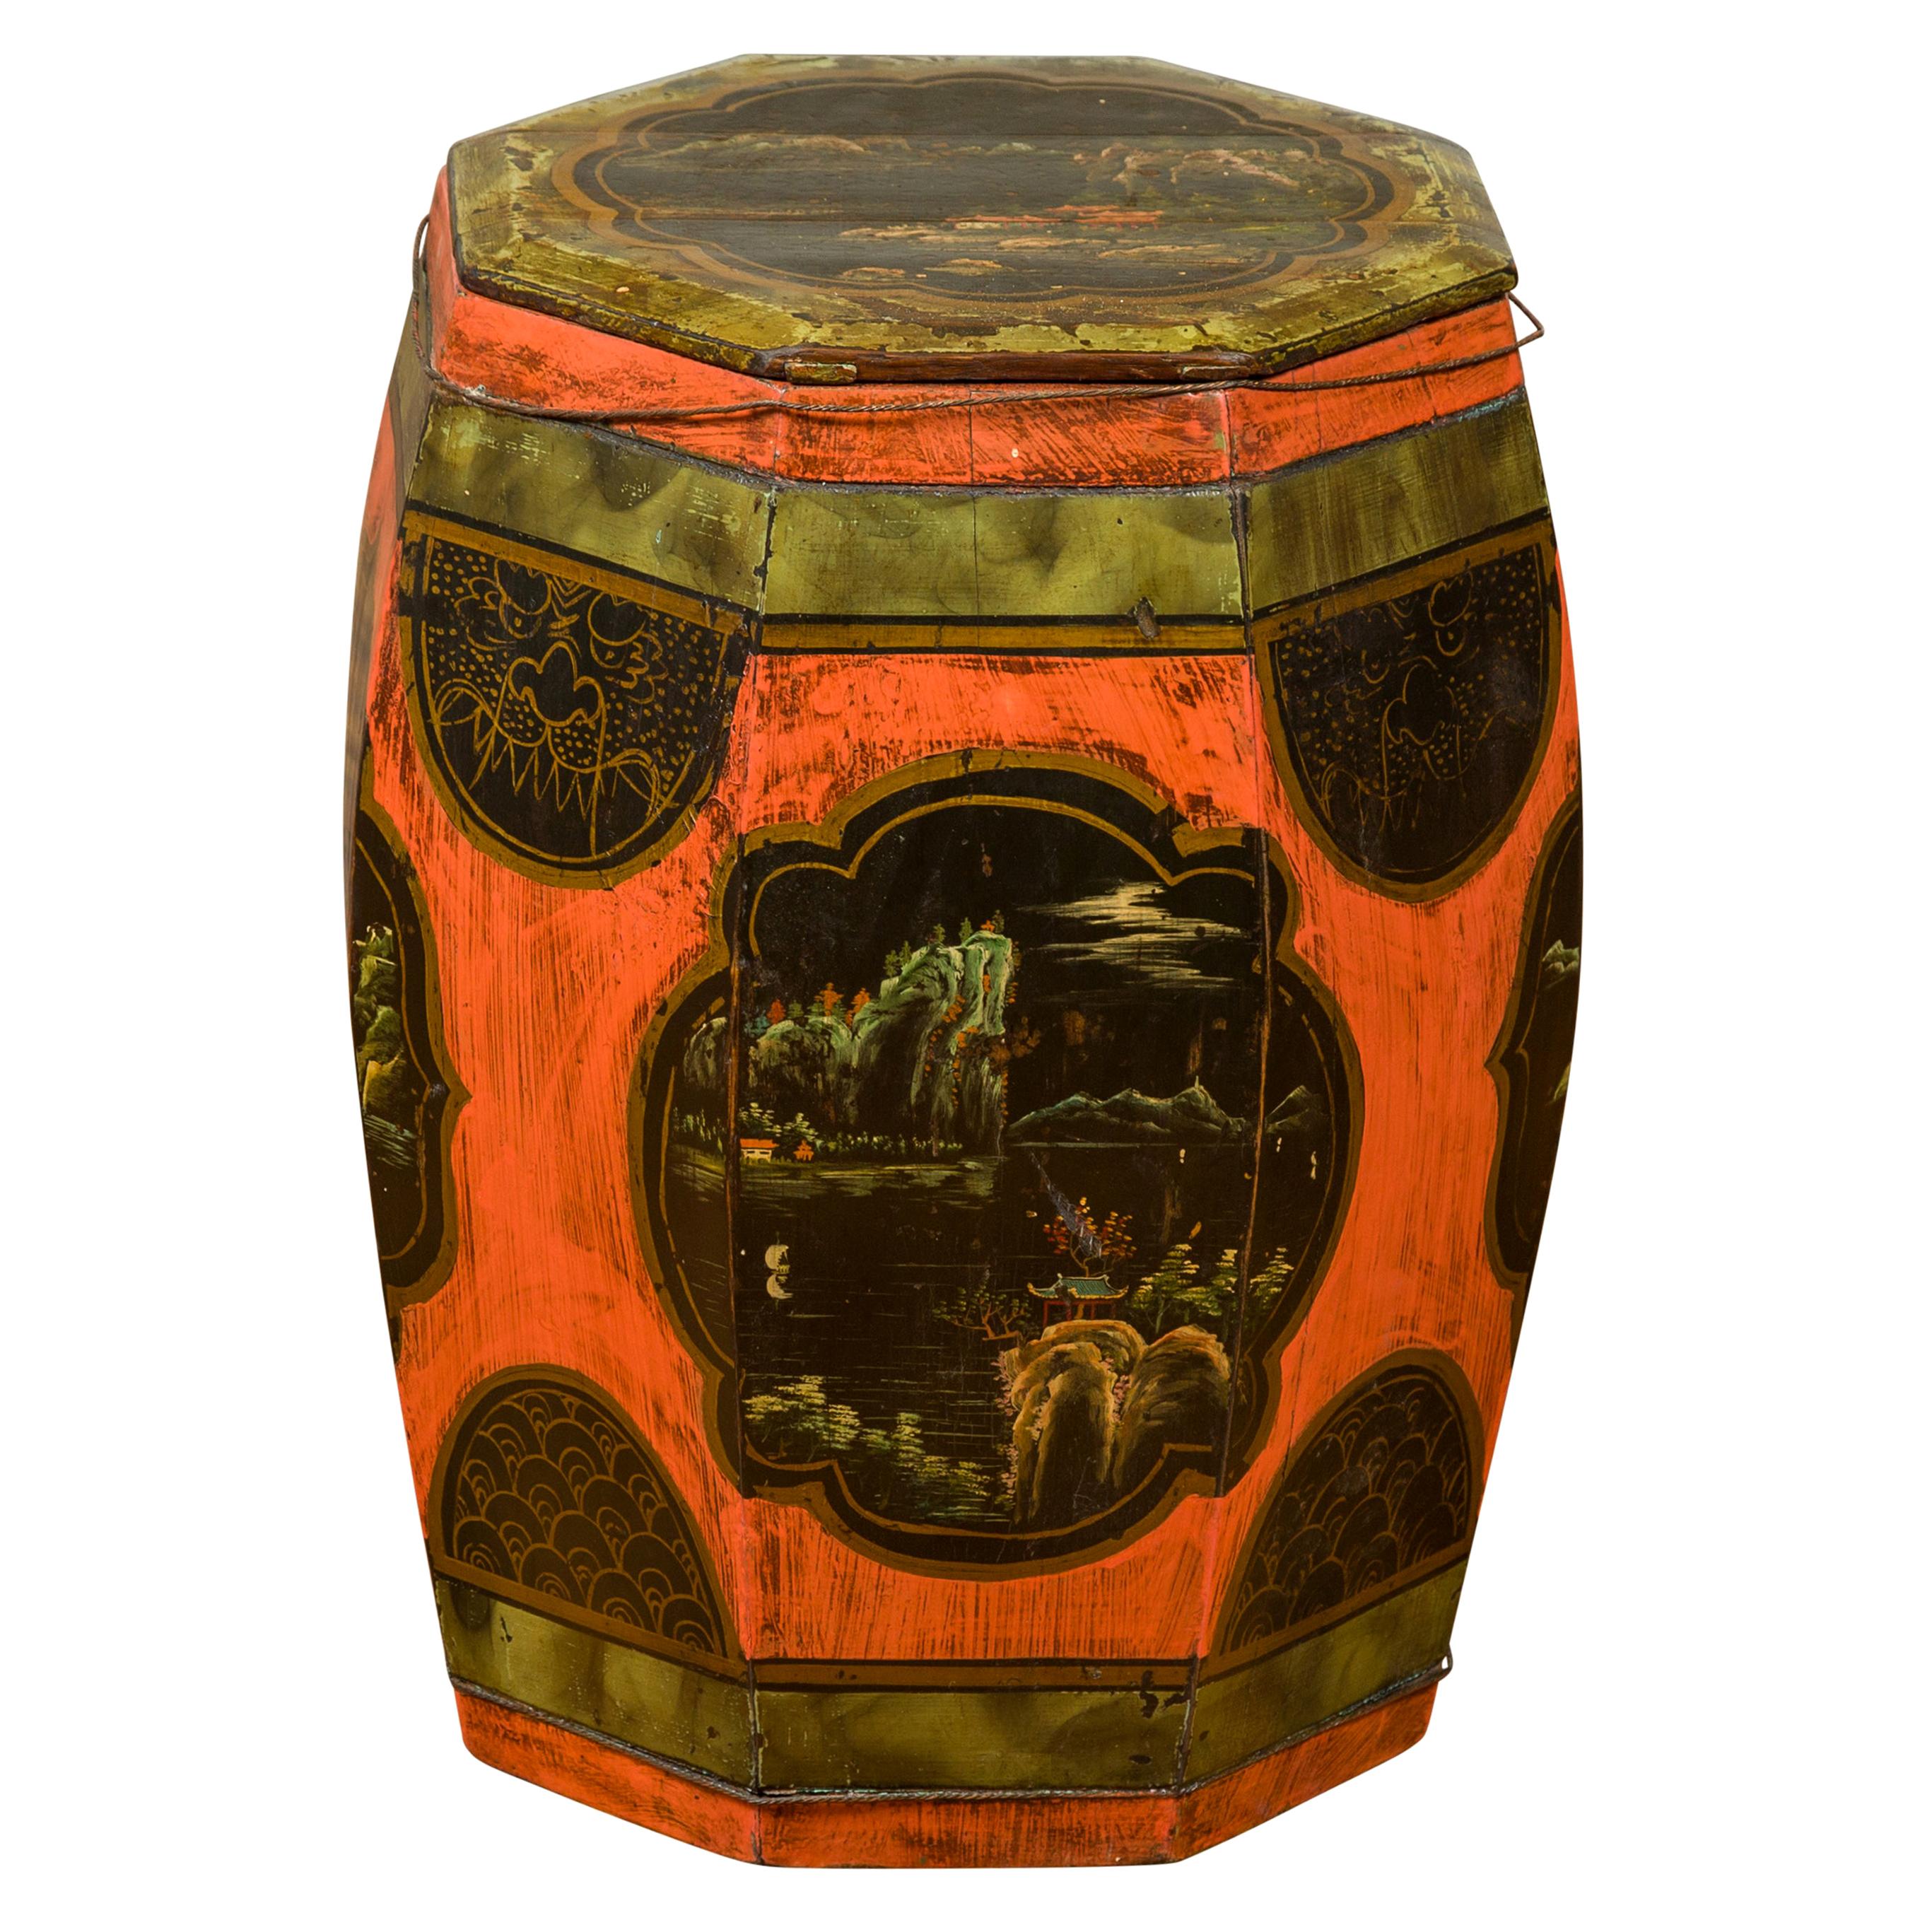 Chinese Vintage Octagonal Garden Seat with Hand Painted Décor and Lid